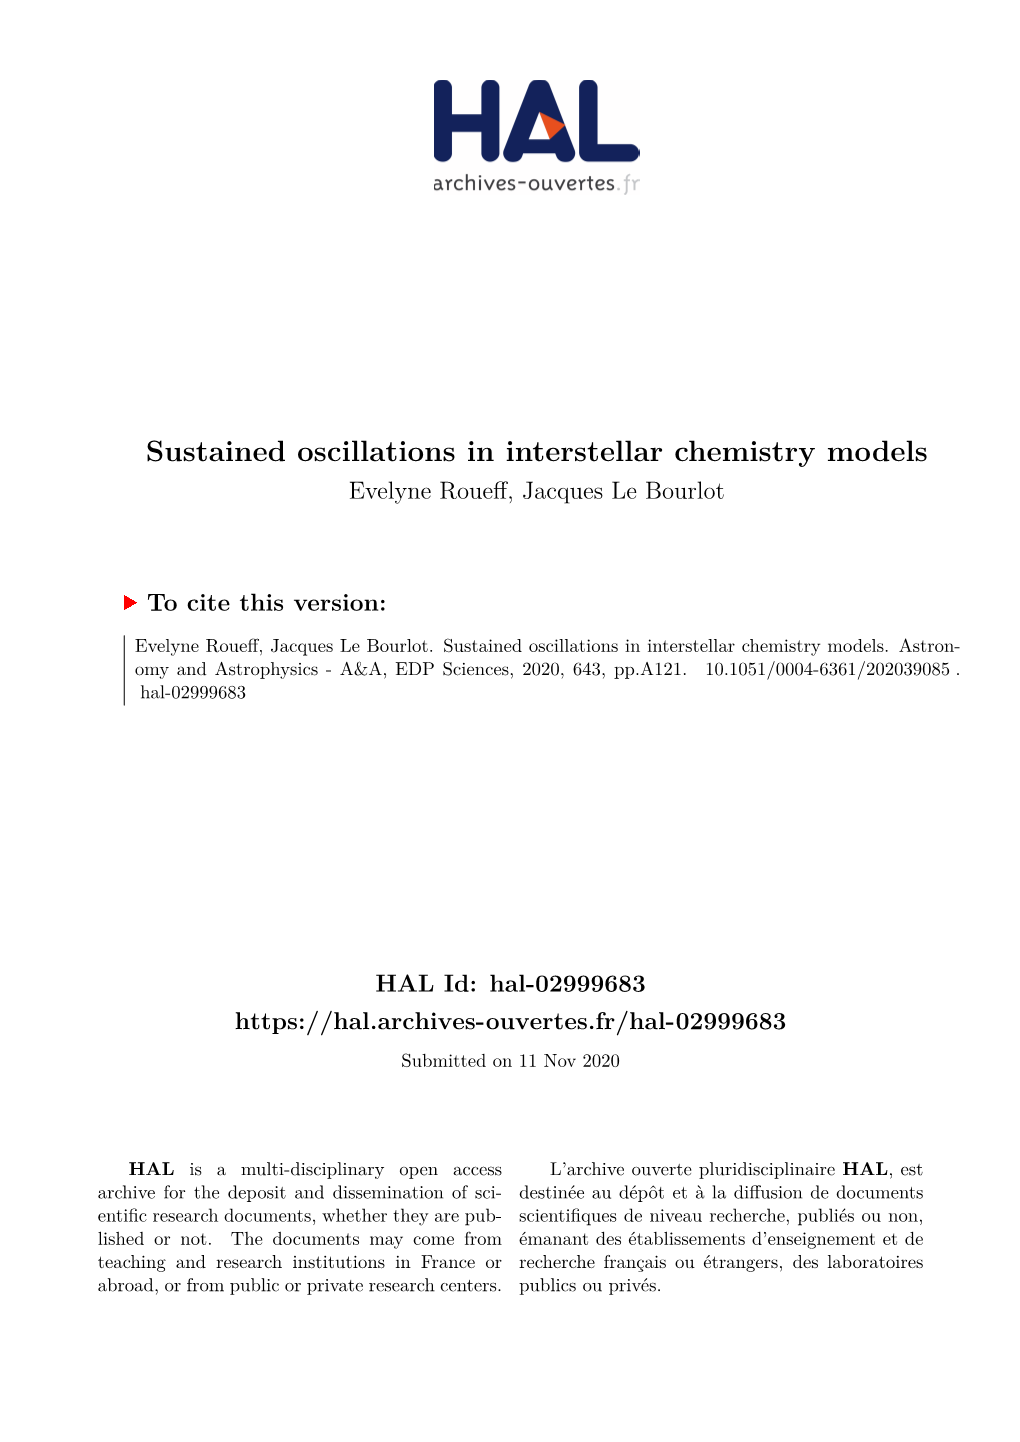 Sustained Oscillations in Interstellar Chemistry Models Evelyne Roueff, Jacques Le Bourlot